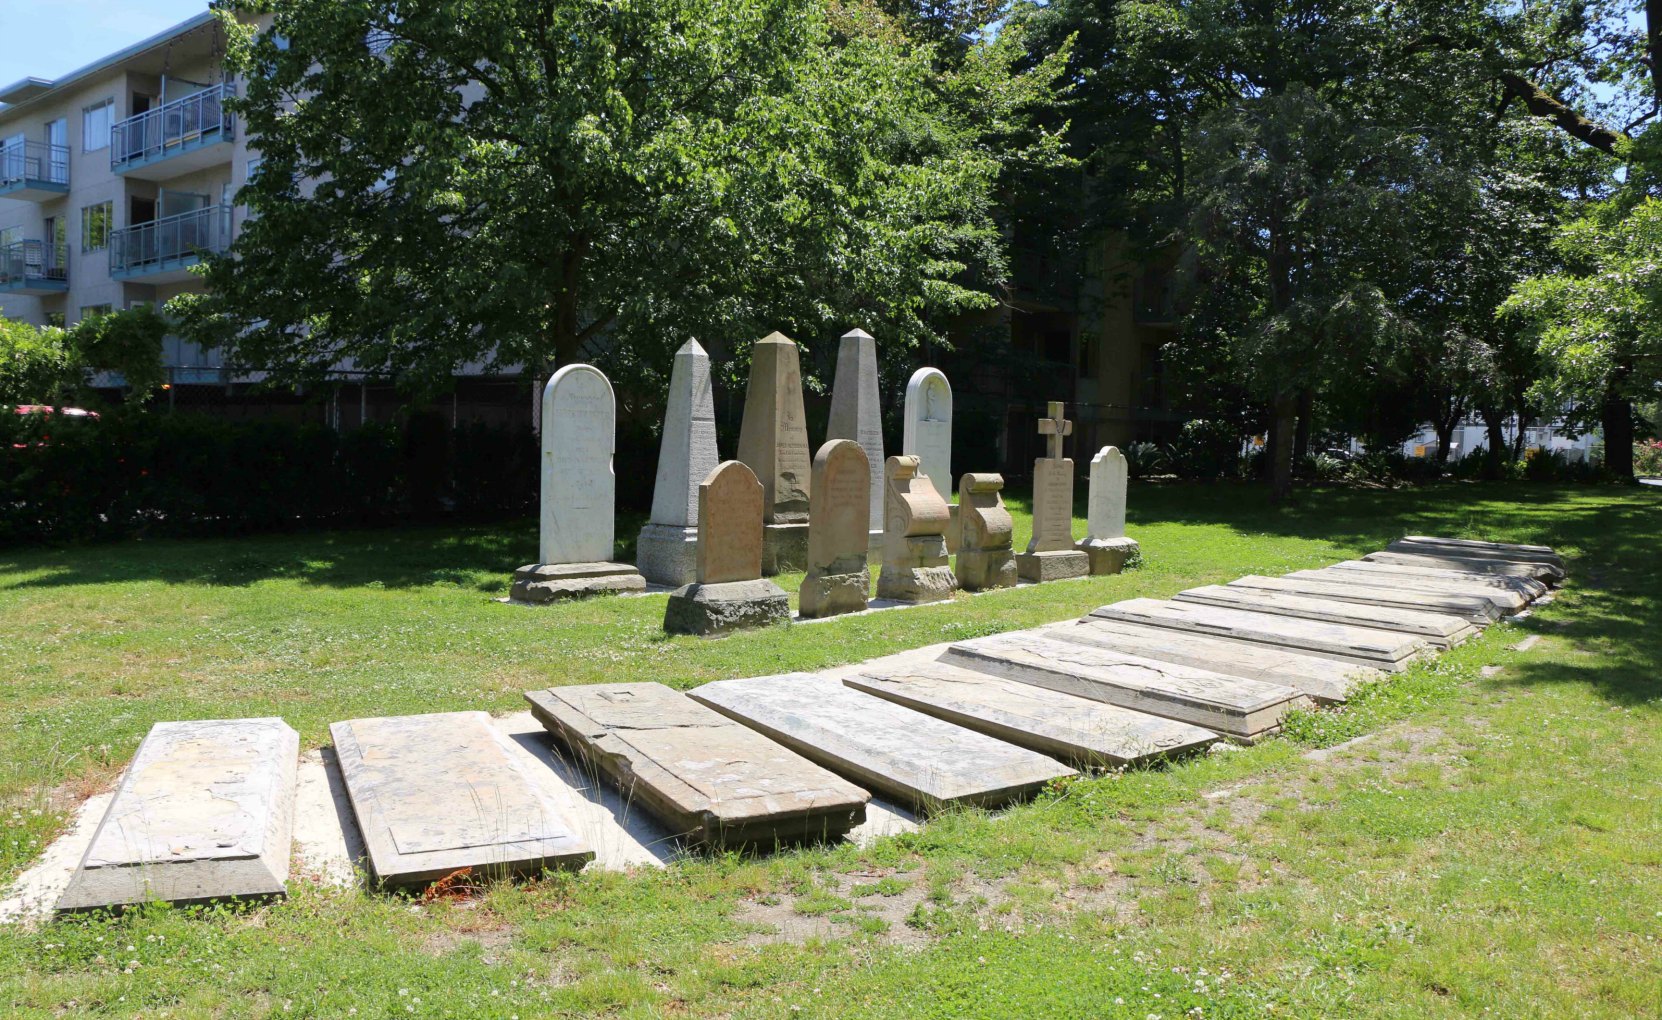 The smaller grave markers remaining in Pioneer Square were moved to the east side of the park. This photo shows how they are currently displayed. (photo by Victoria Online Sightseeing Tours)